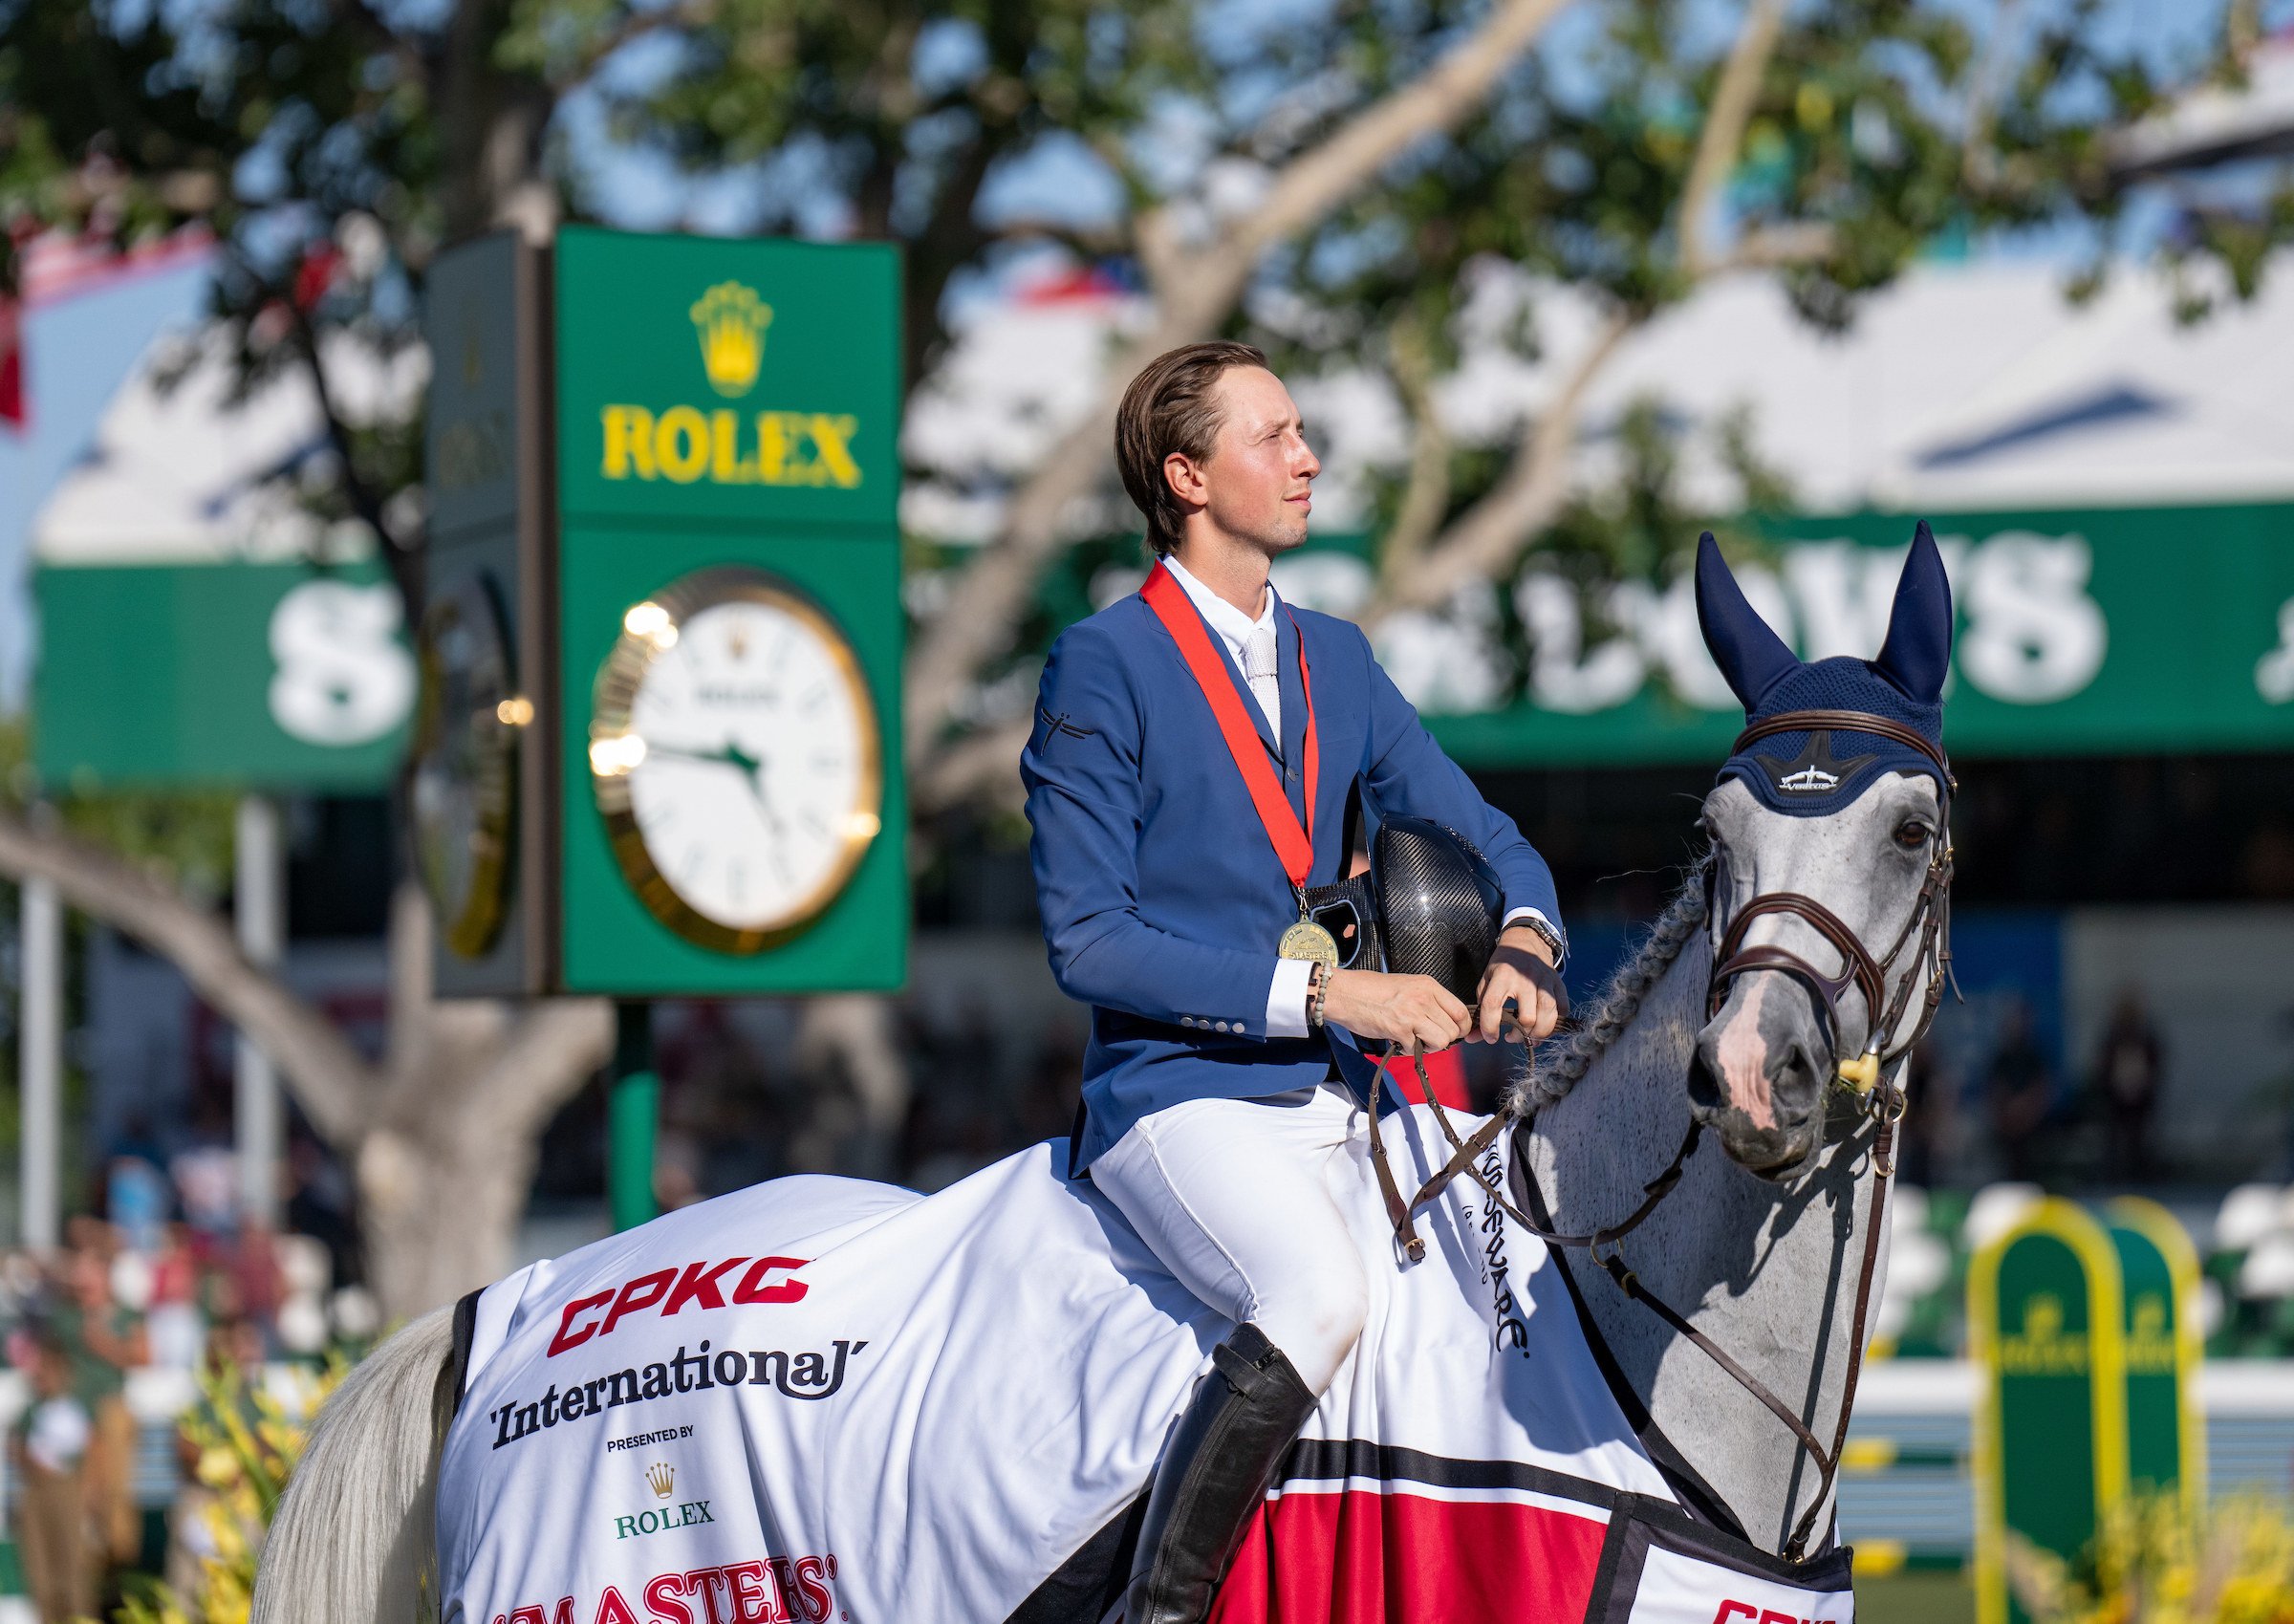 Martin Fuchs at the CPKC International Grand Prix, presented by Rolex, after riding Leone Jei to victory. The legendary Swiss luxury watch brand is the presenting sponsor of CHI Geneva as well as the sponsor of the International Jumping Riders Club top 10 final and the Rolex Grand Prix, and continues to partner with outstanding young show jumpers, including Fuchs, Steve Guerdat and Harry Charles. Photos: Handout